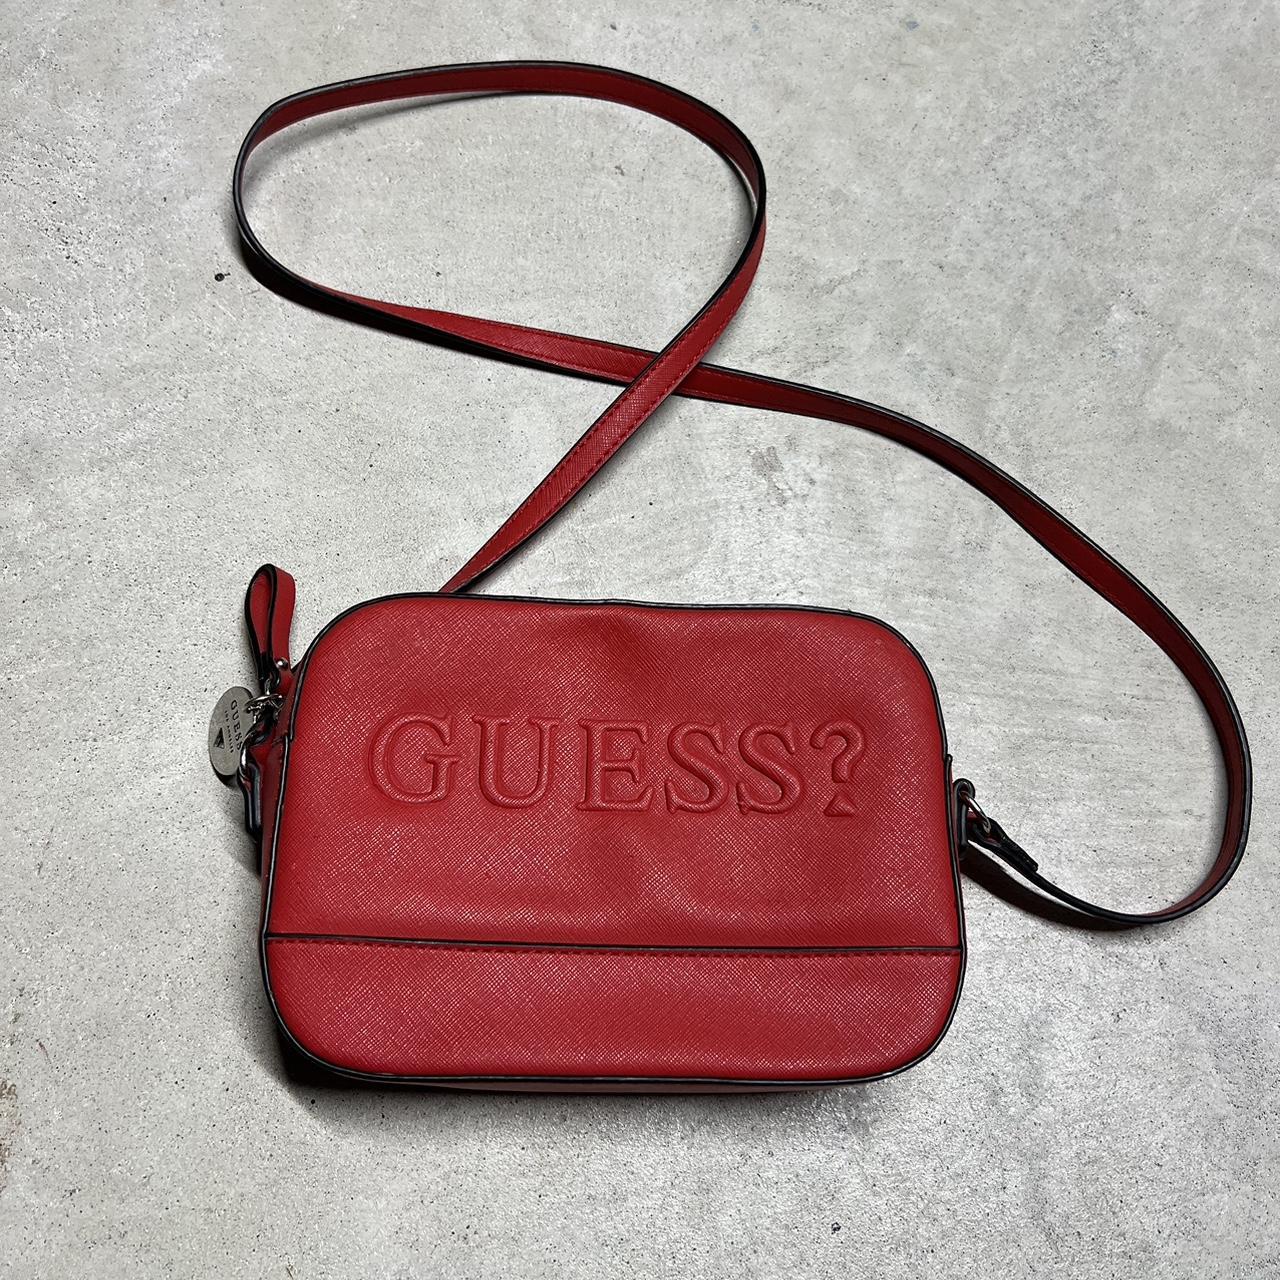 Guess Guess Luxe Red Crossbody Handbag Mini Bag - Great Condition